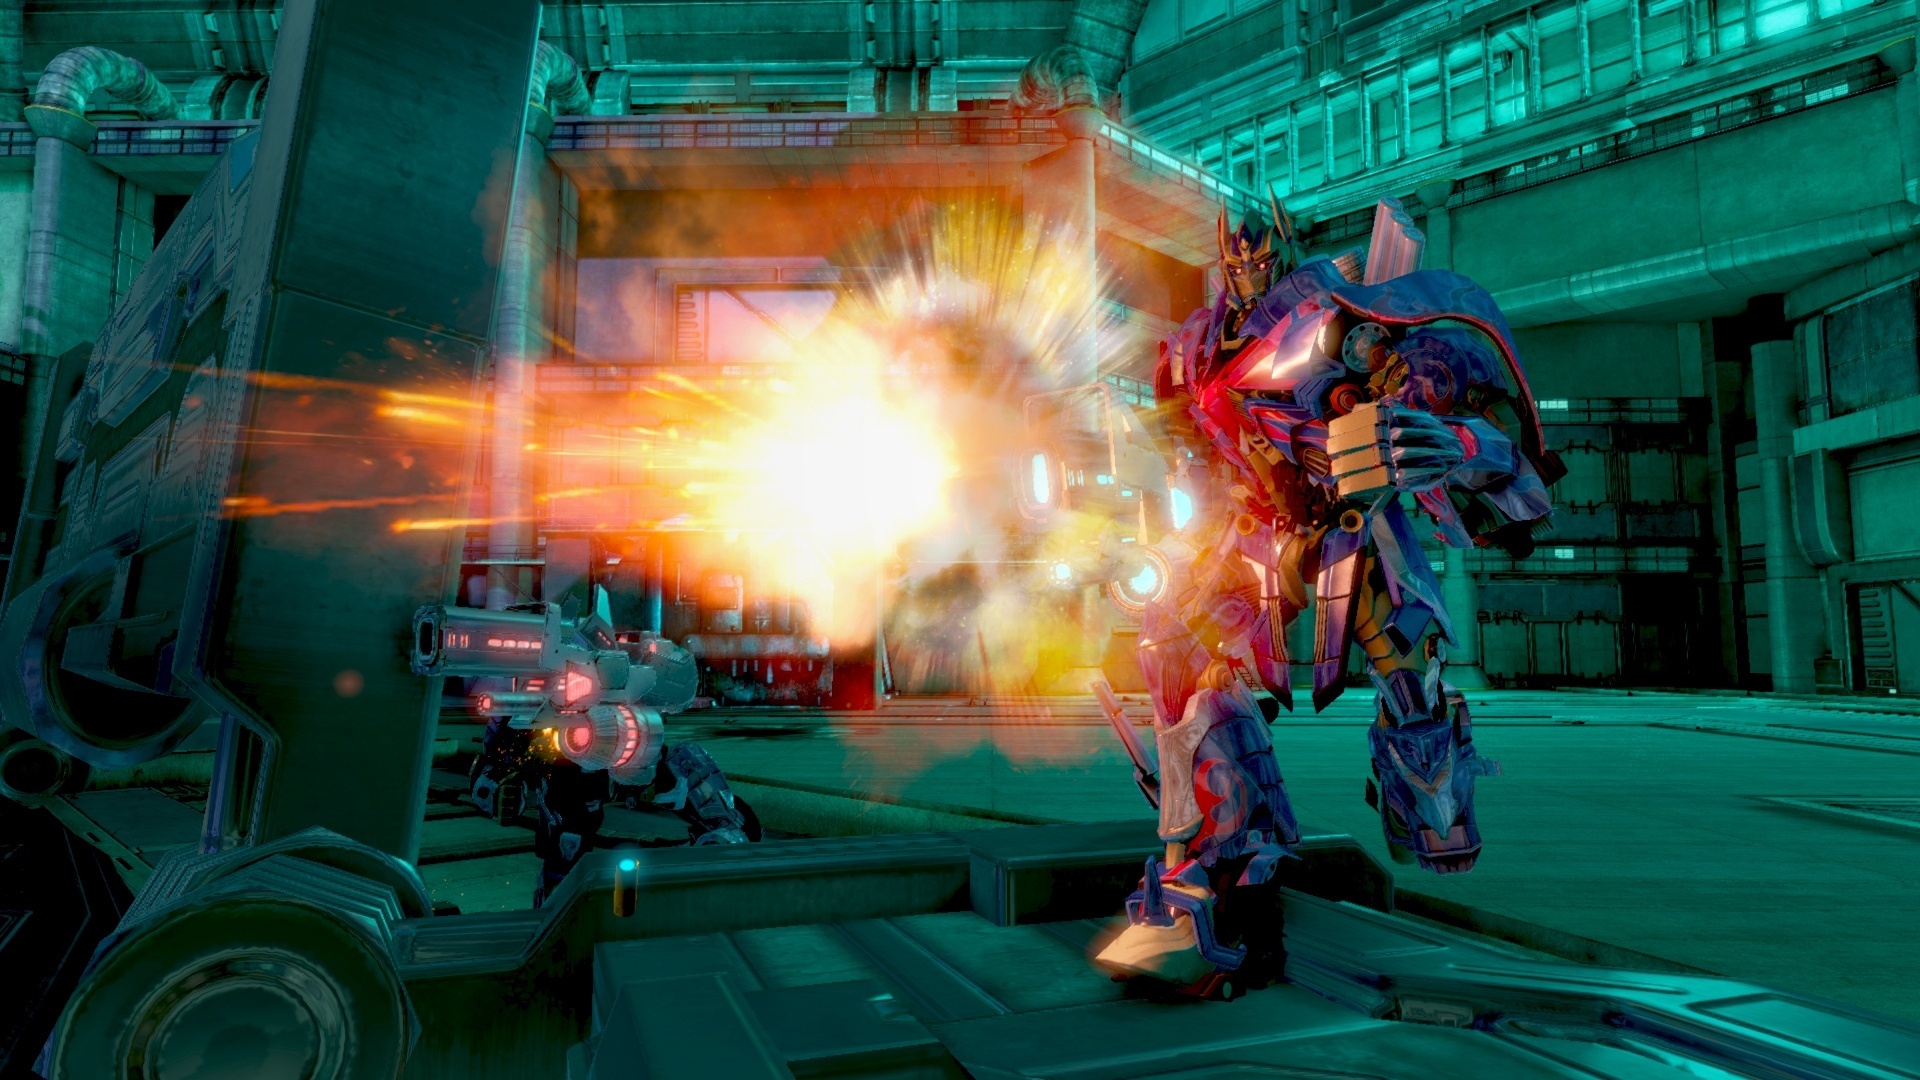 transformers rise of the dark spark pc